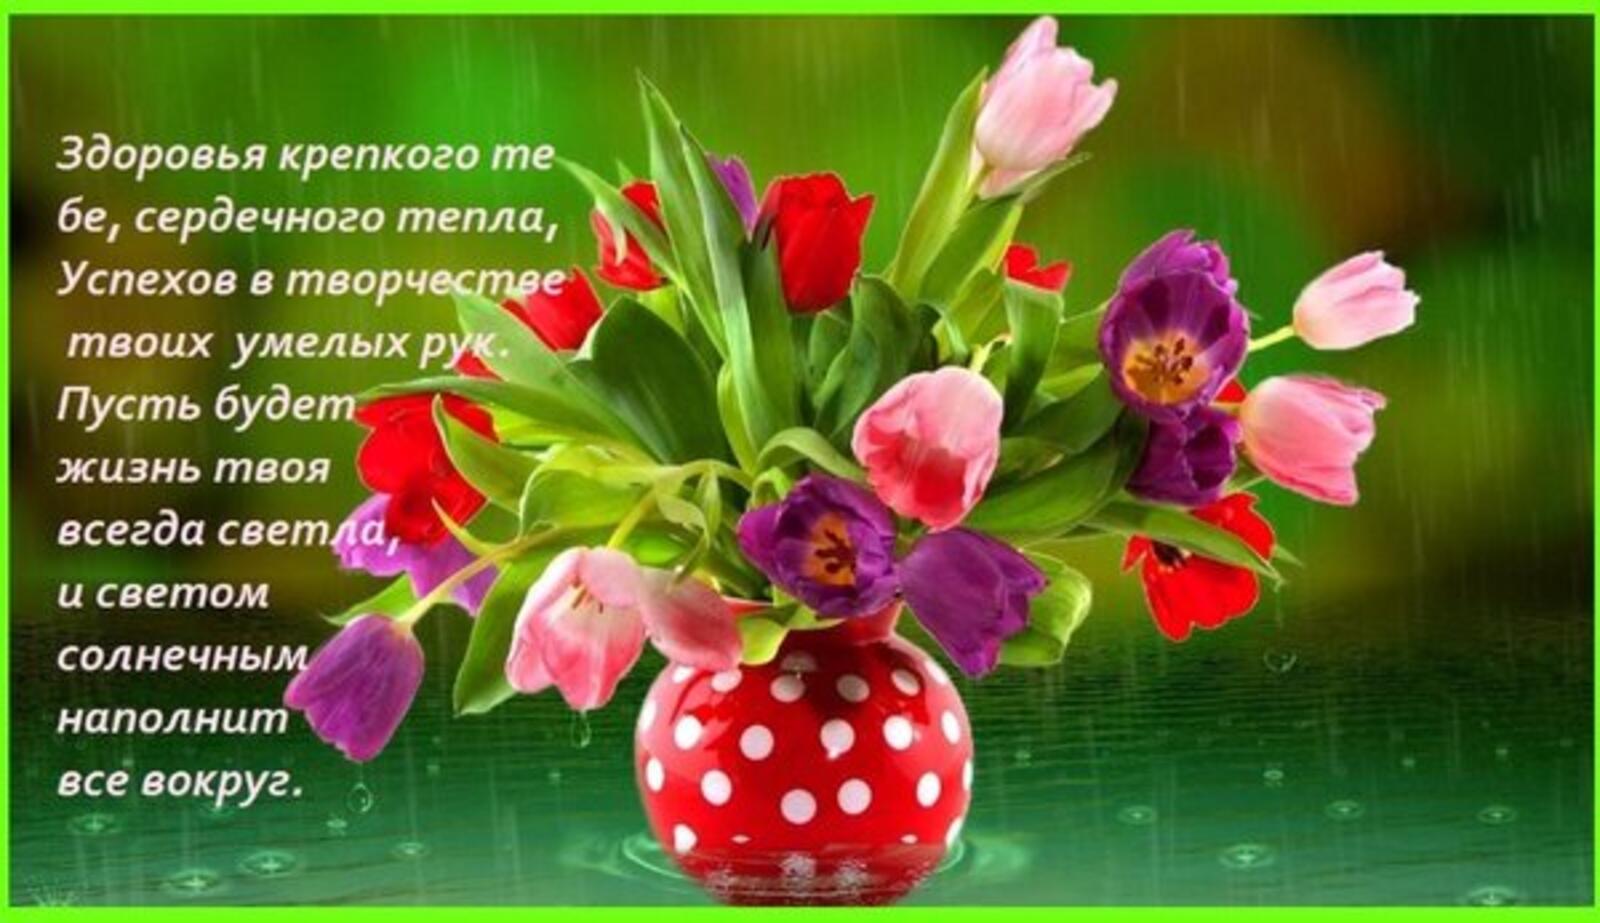 A postcard on the subject of bouquet of flowers vase verse for free